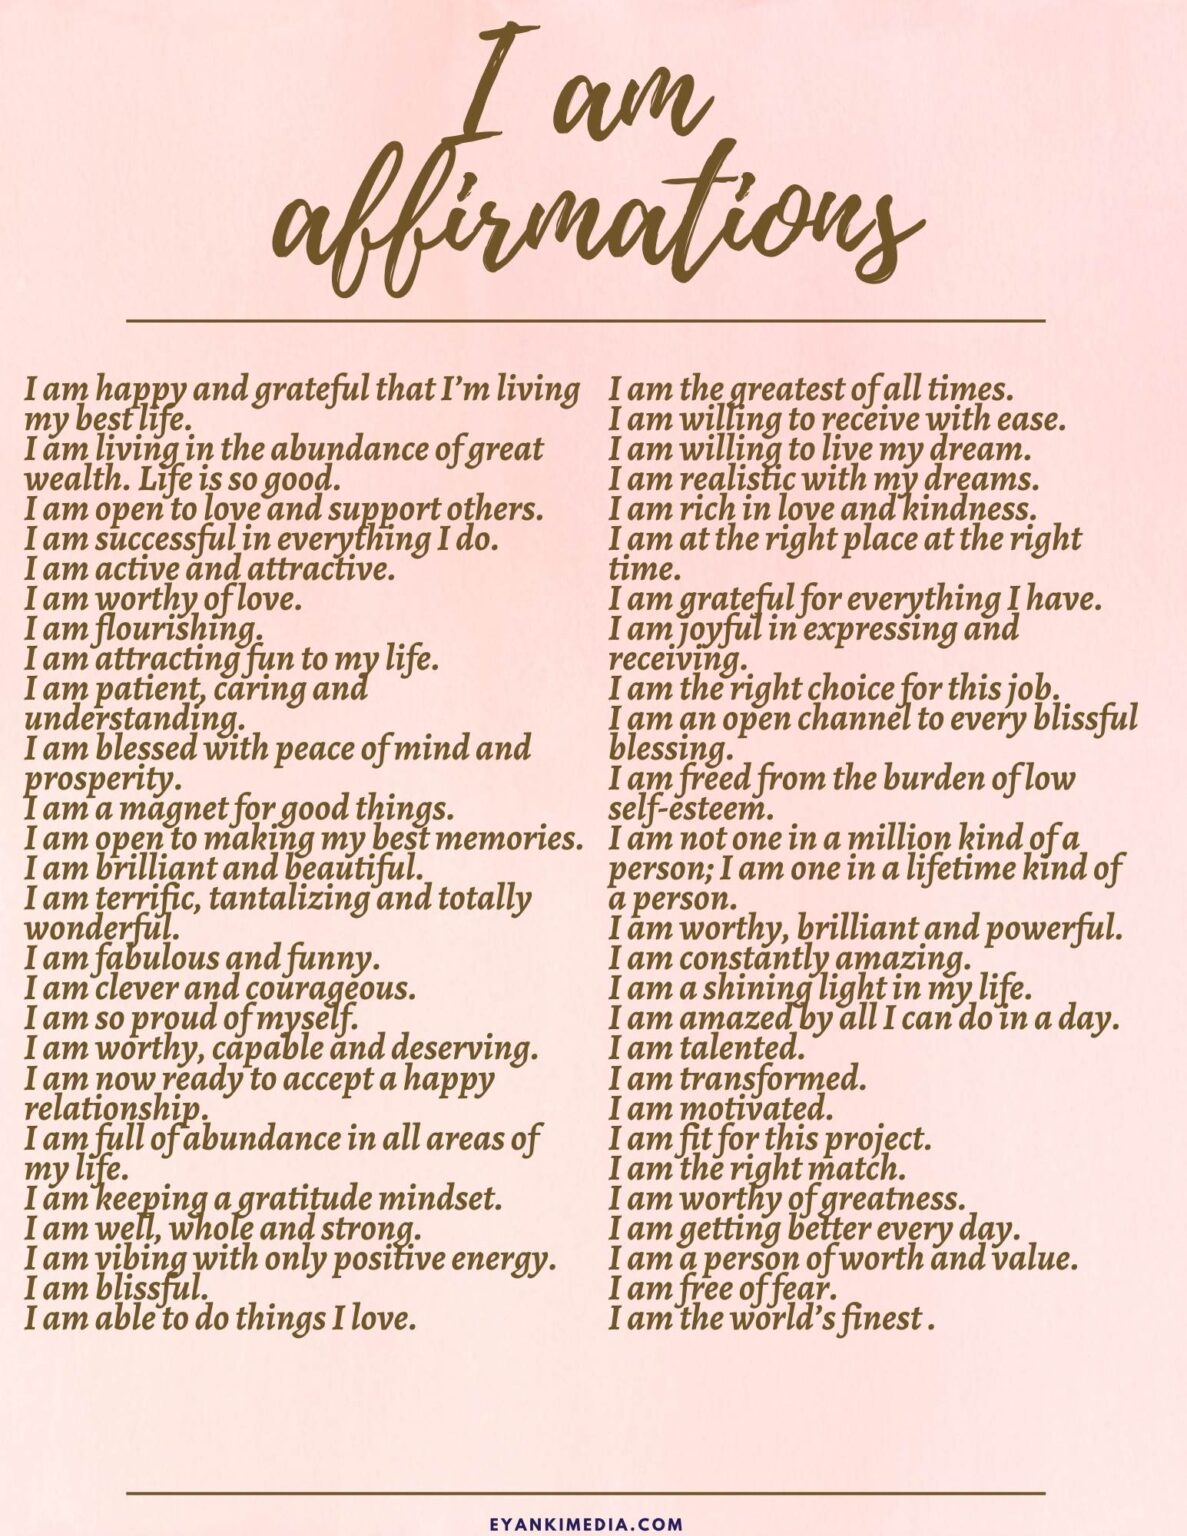 50 Positive I Am Affirmations List: I Am Statements For Yourself